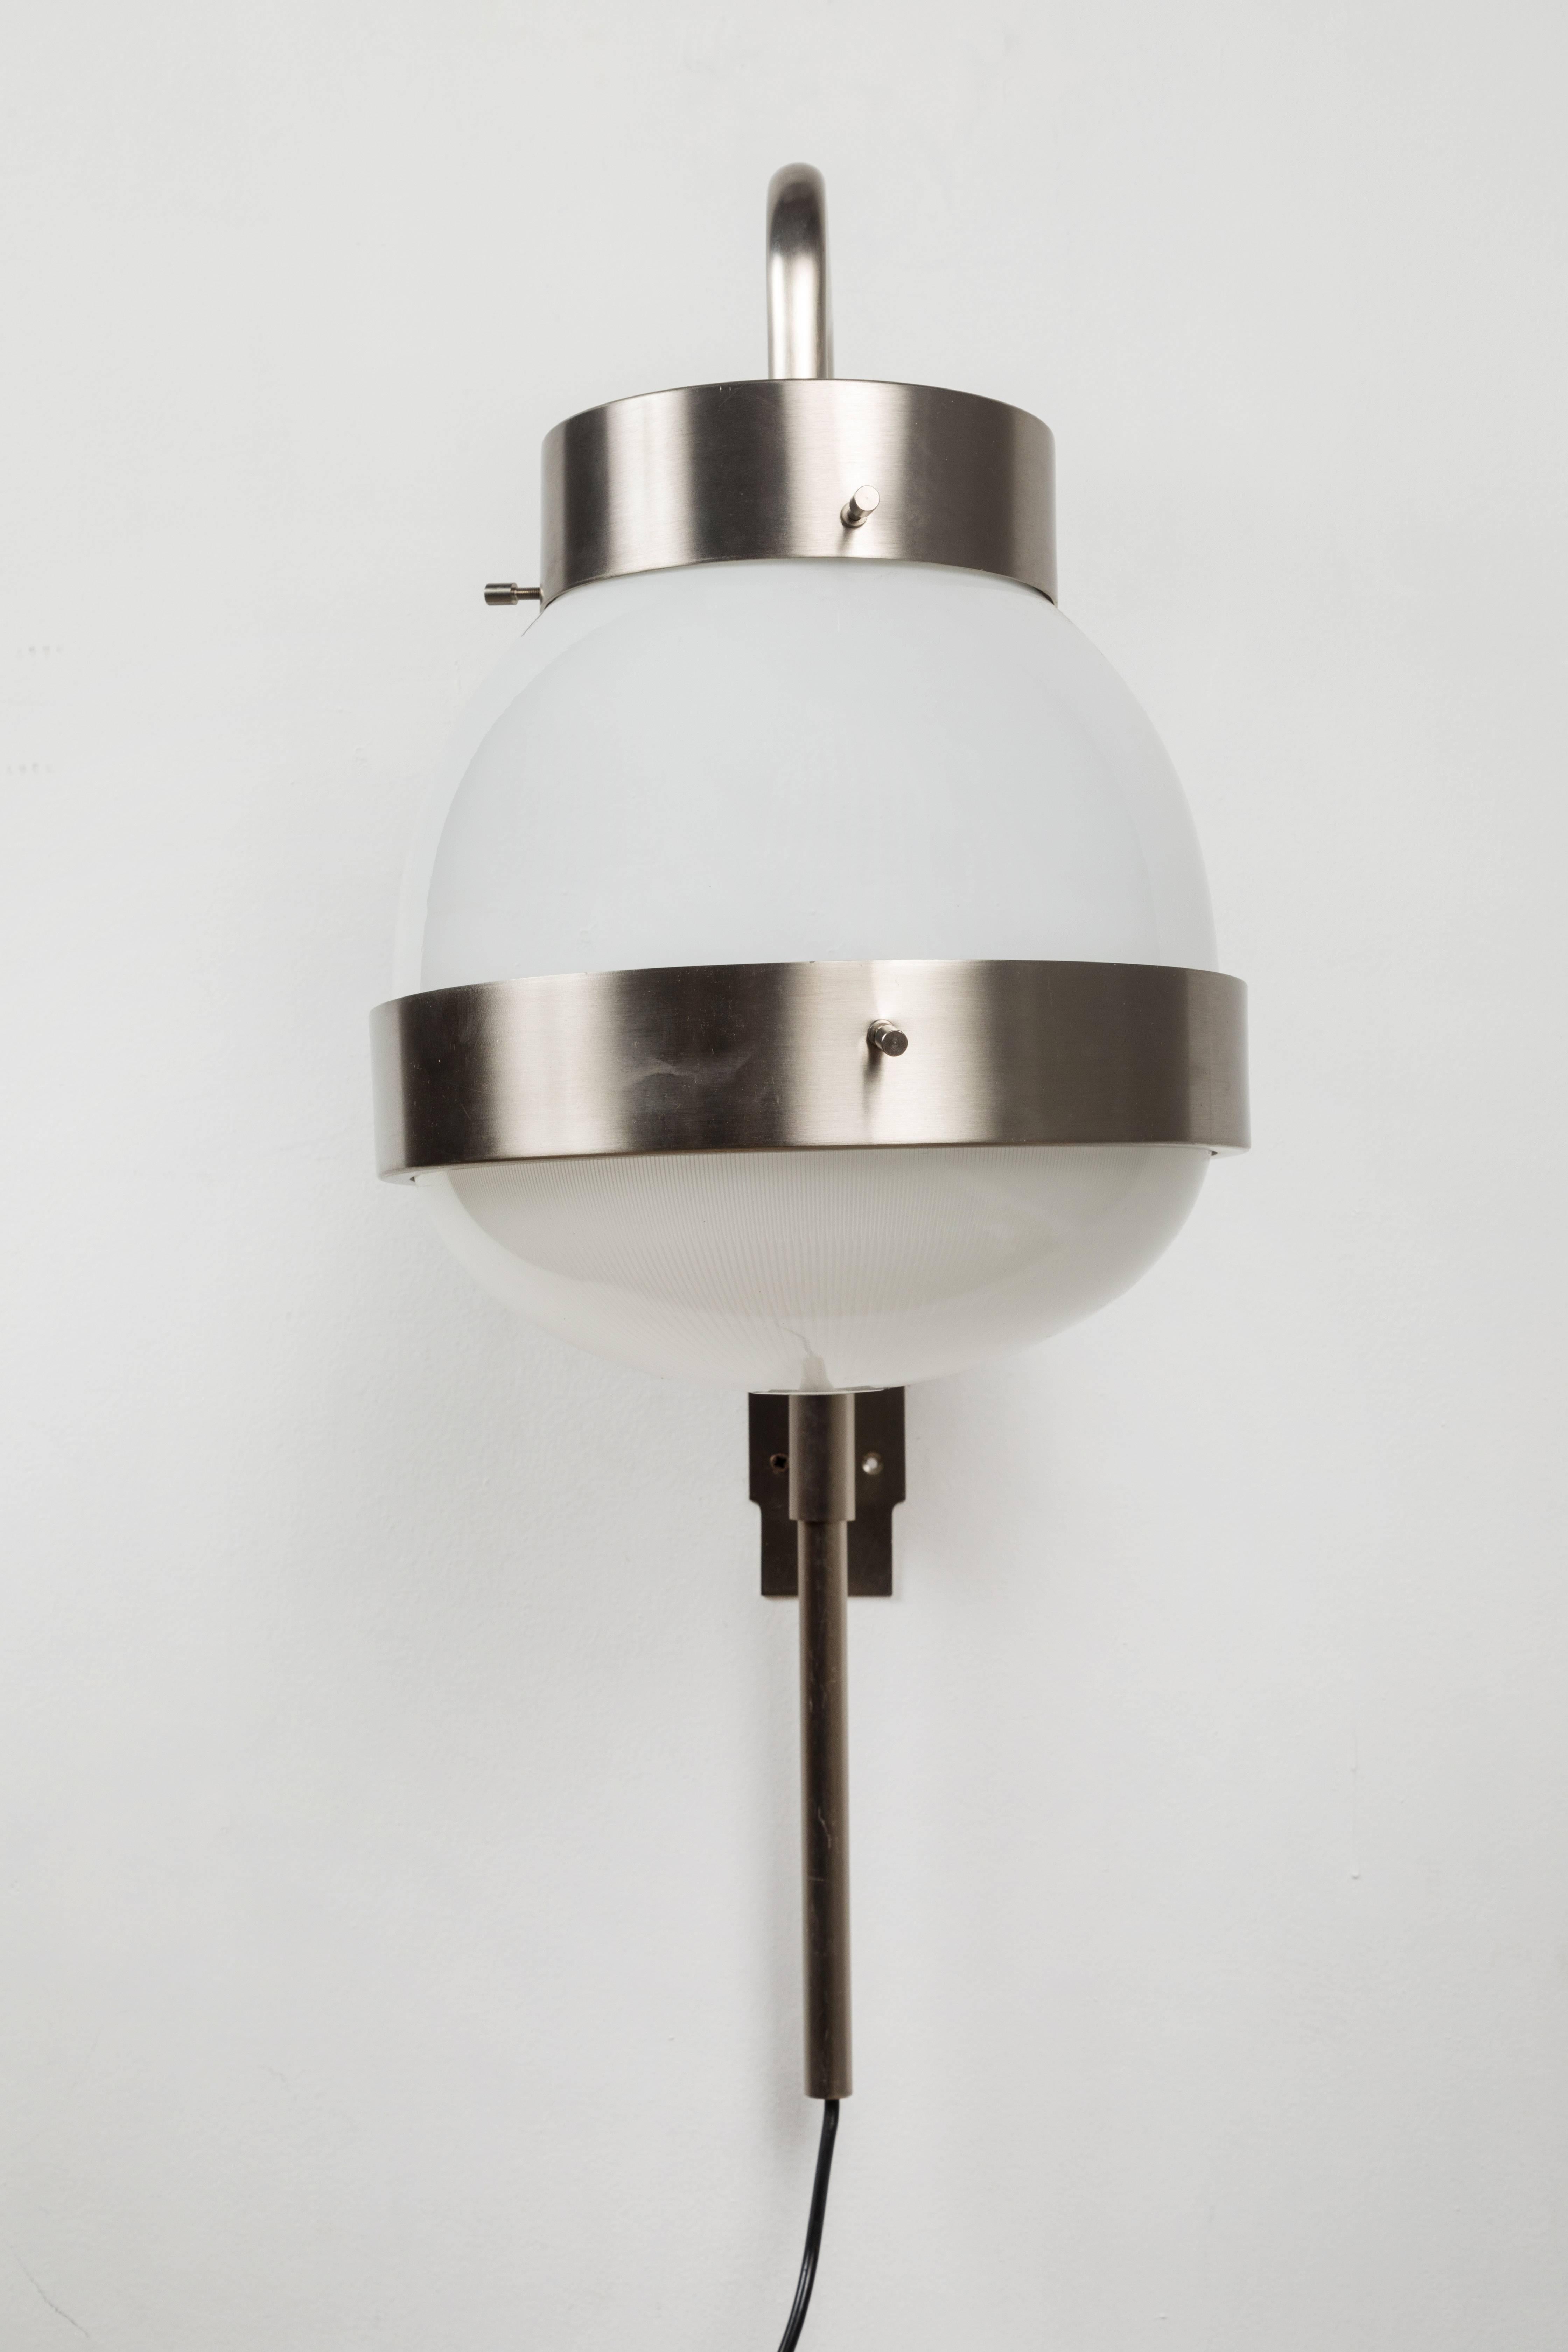 1960s Sergio Mazza 'Delta' wall lights for Artemide. Executed in brushed nickelled brass, pressed and glossy opaline glass. A highly adjustable light that can be rotated left or right as well as up an down. 

Price is per item. 4 available.

Born in